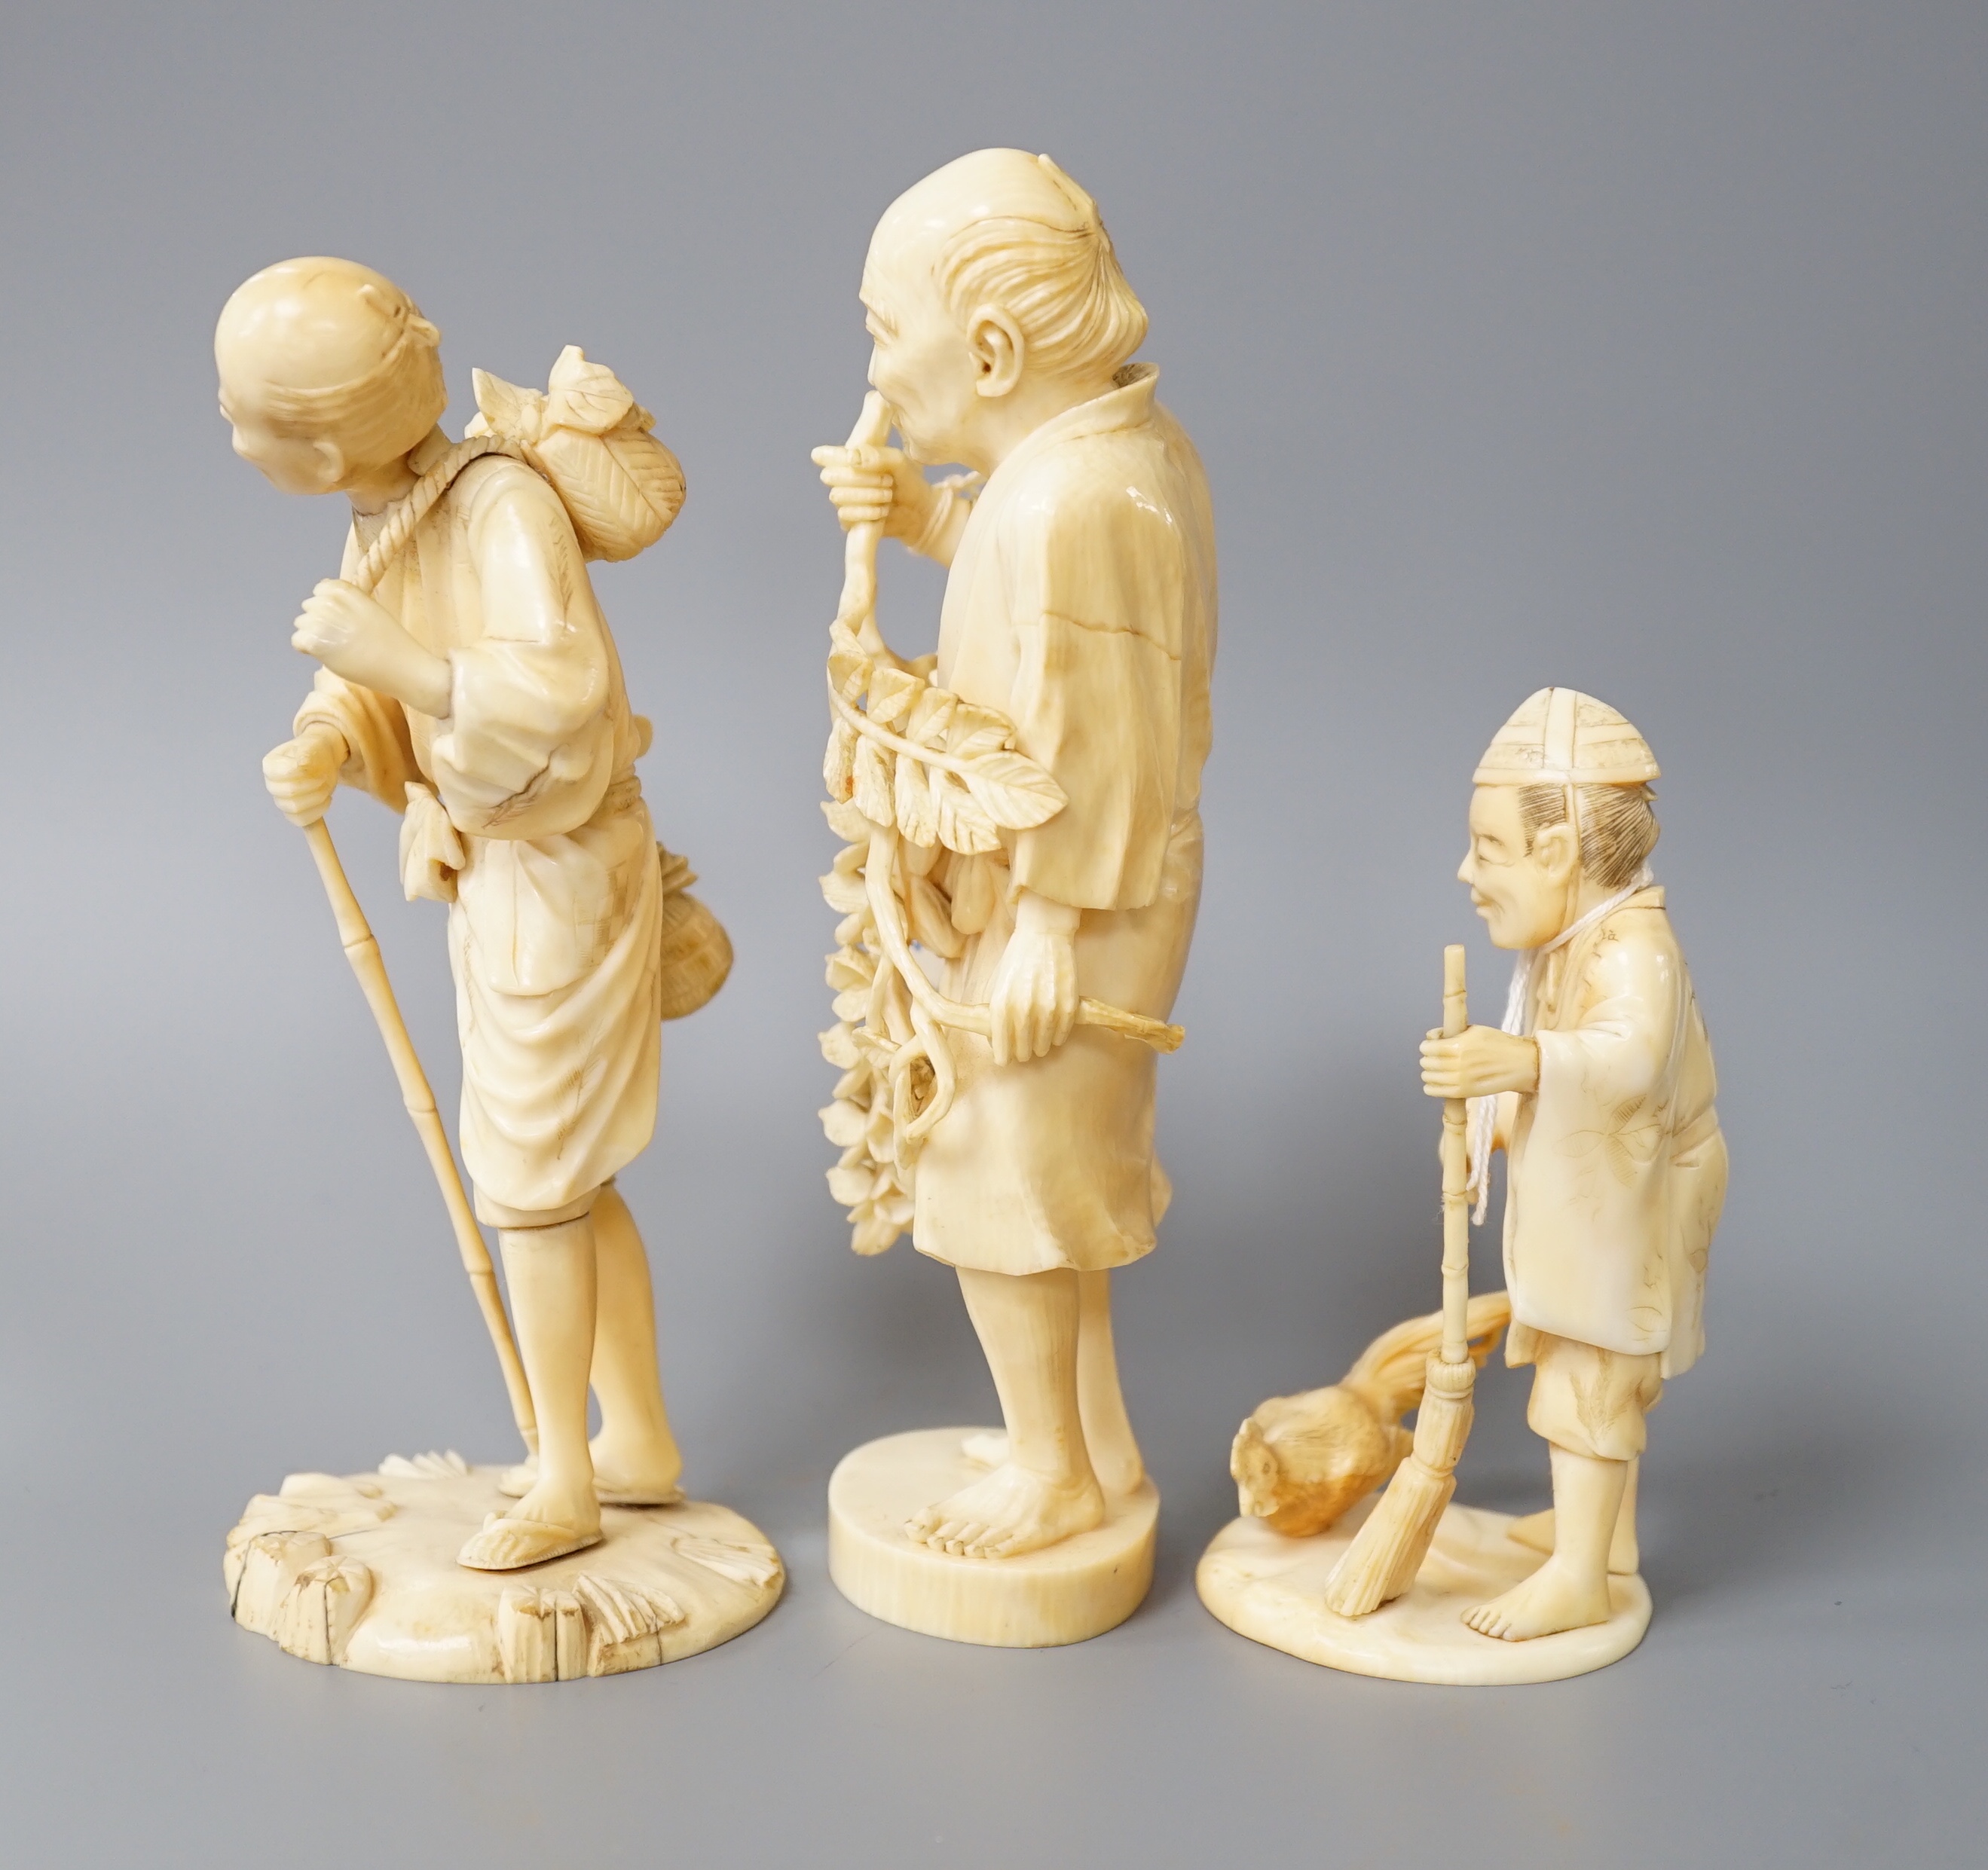 A 19th century Japanese ivory okimono of a gentleman holding a branch, another sectional figure of a - Image 5 of 6